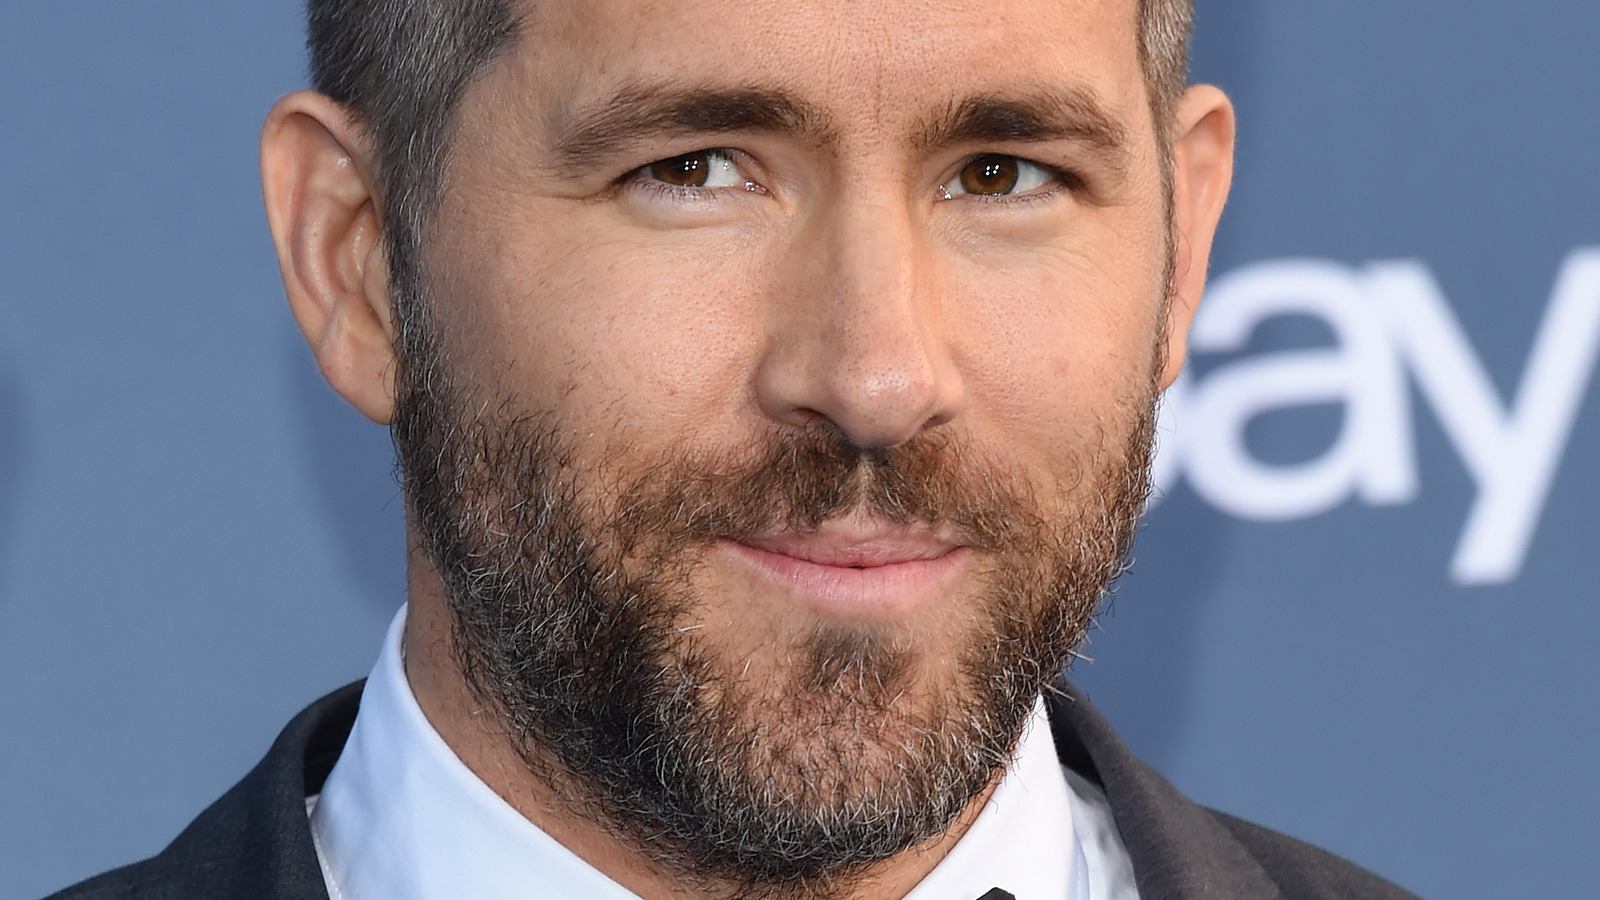 Ryan Reynolds says he's taking 'a little sabbatical' from making